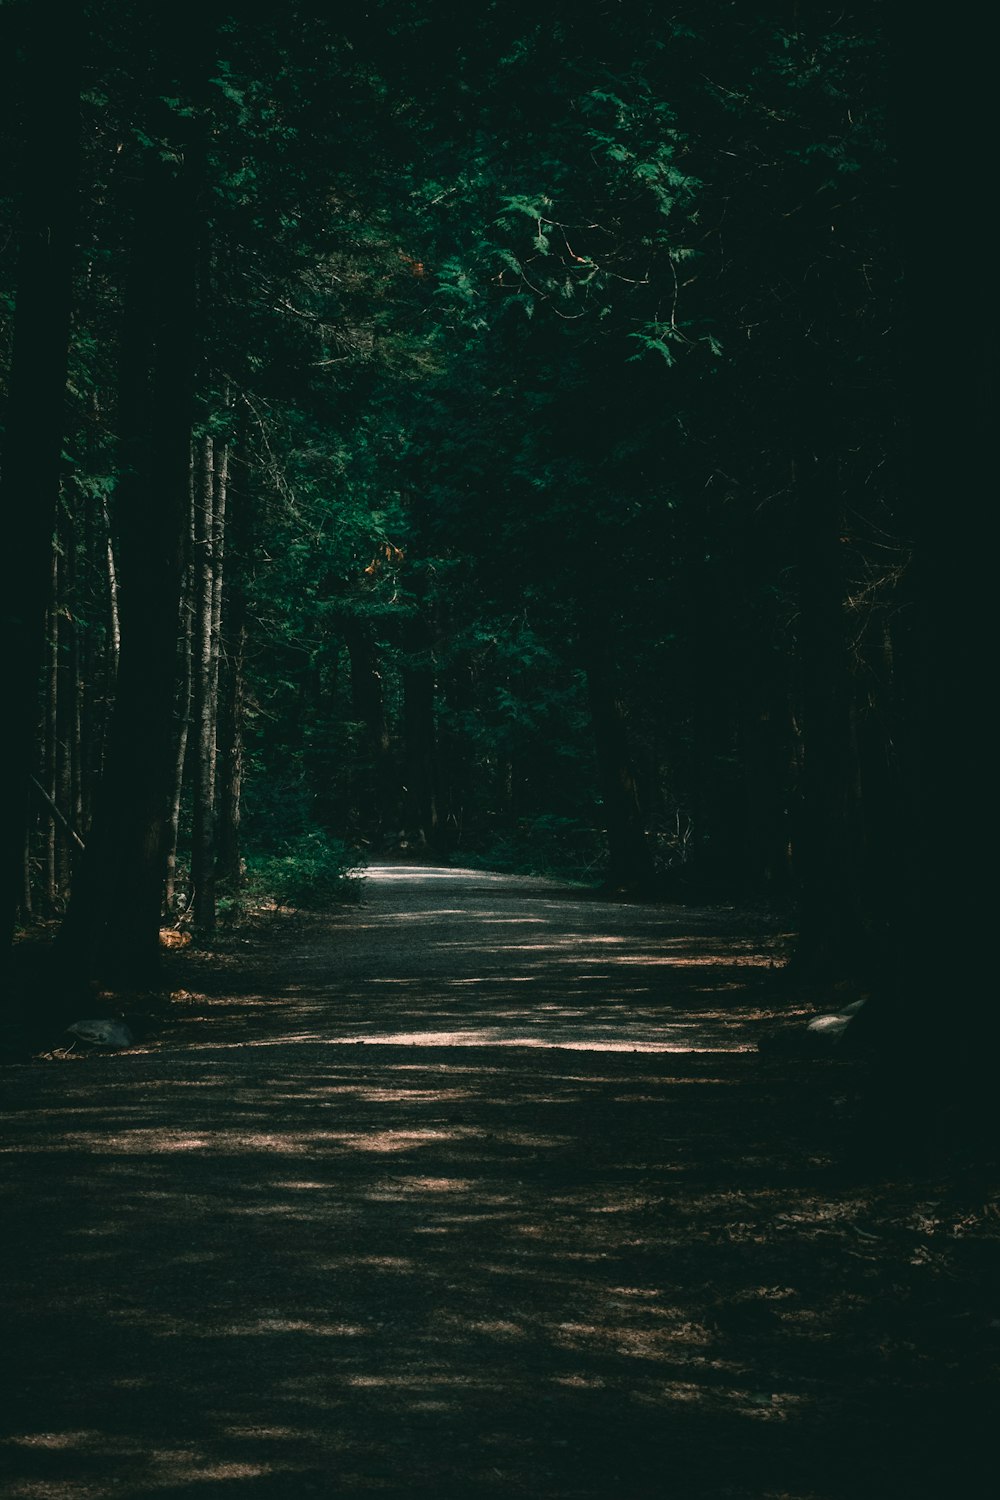 a dark road in the middle of a forest